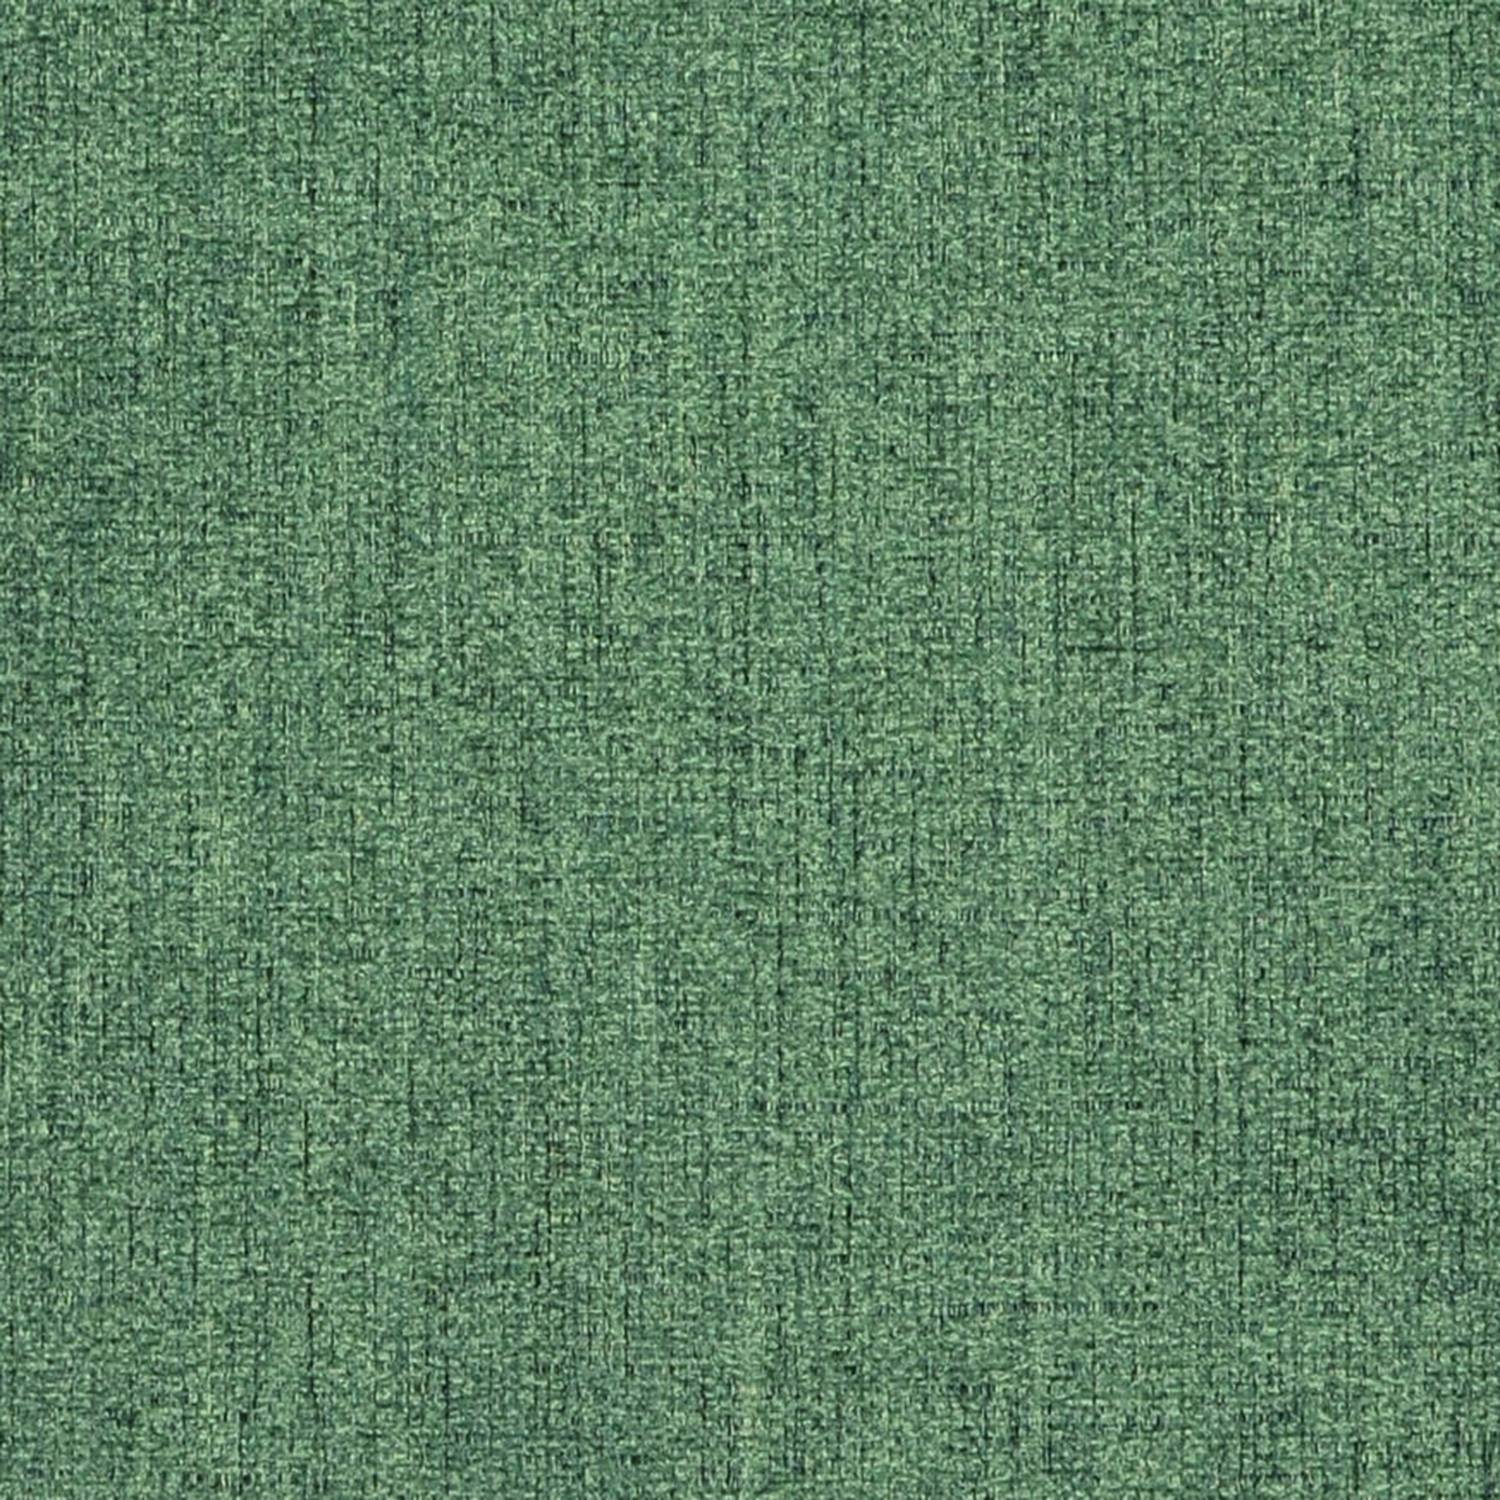 VANTAGE/AQUA - Upholstery Only Fabric Suitable For Upholstery And Pillows Only.   - Farmers Branch